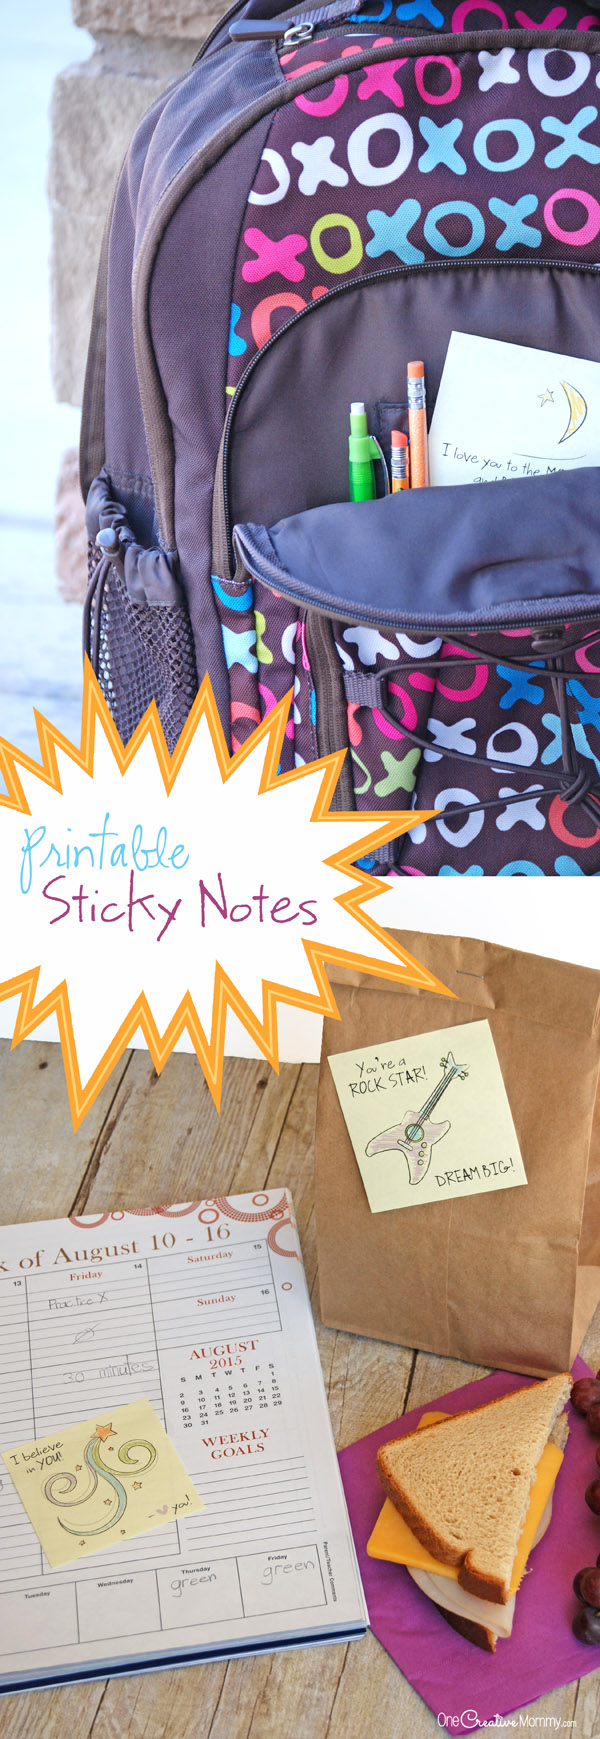 Hide these cute printable sticky notes in your kid's lunch and backpacks, and make their day! {OneCreativeMommy.com} #FuelTheirAdventures #Ad